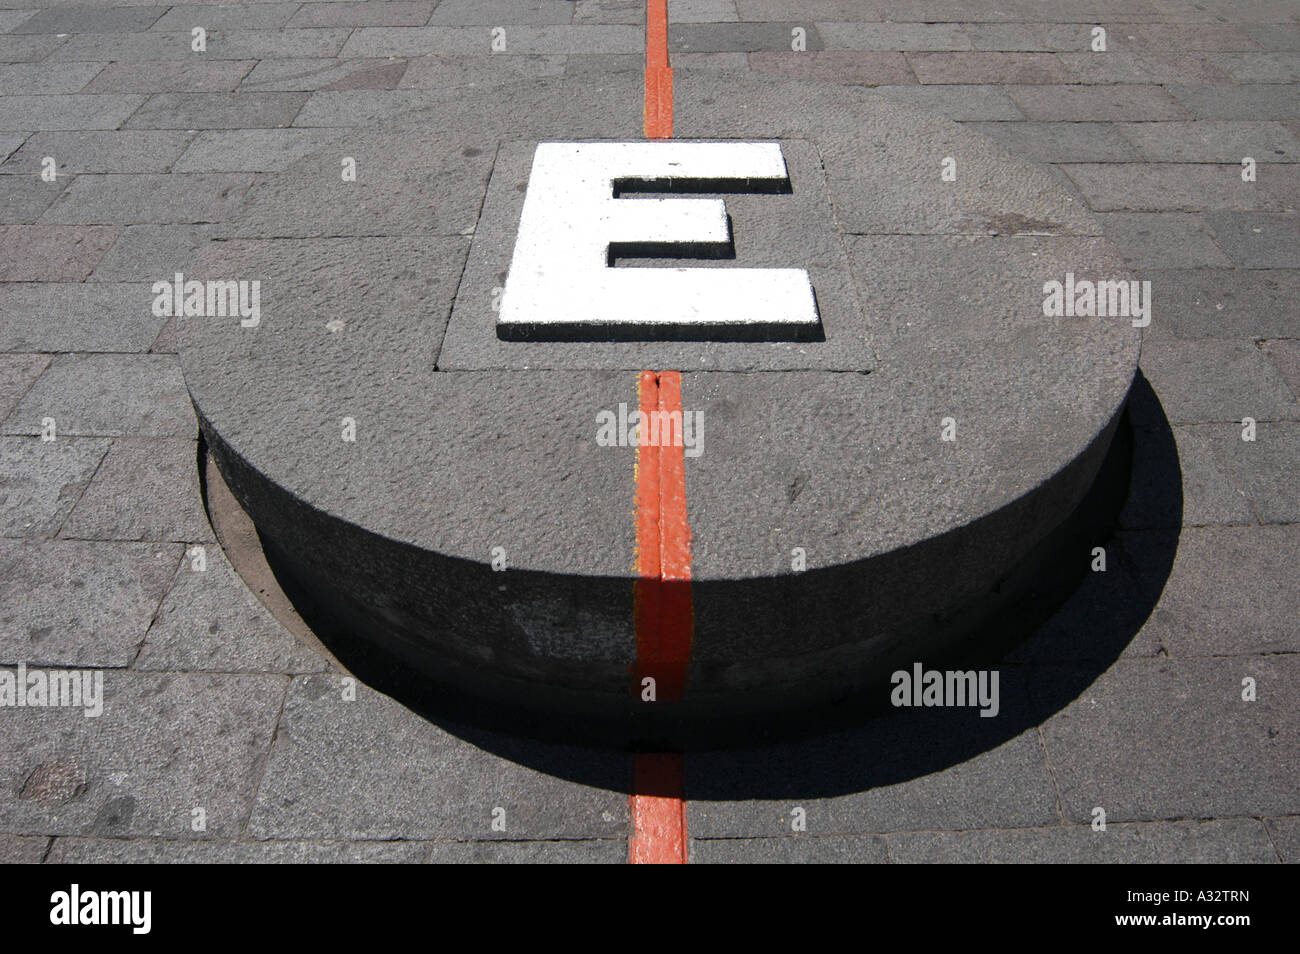 Symbolic Equator line and huge letter 'E' in foot of the Monument Mitad del Mundo (Middle of the World) near Quito, Ecuador Stock Photo